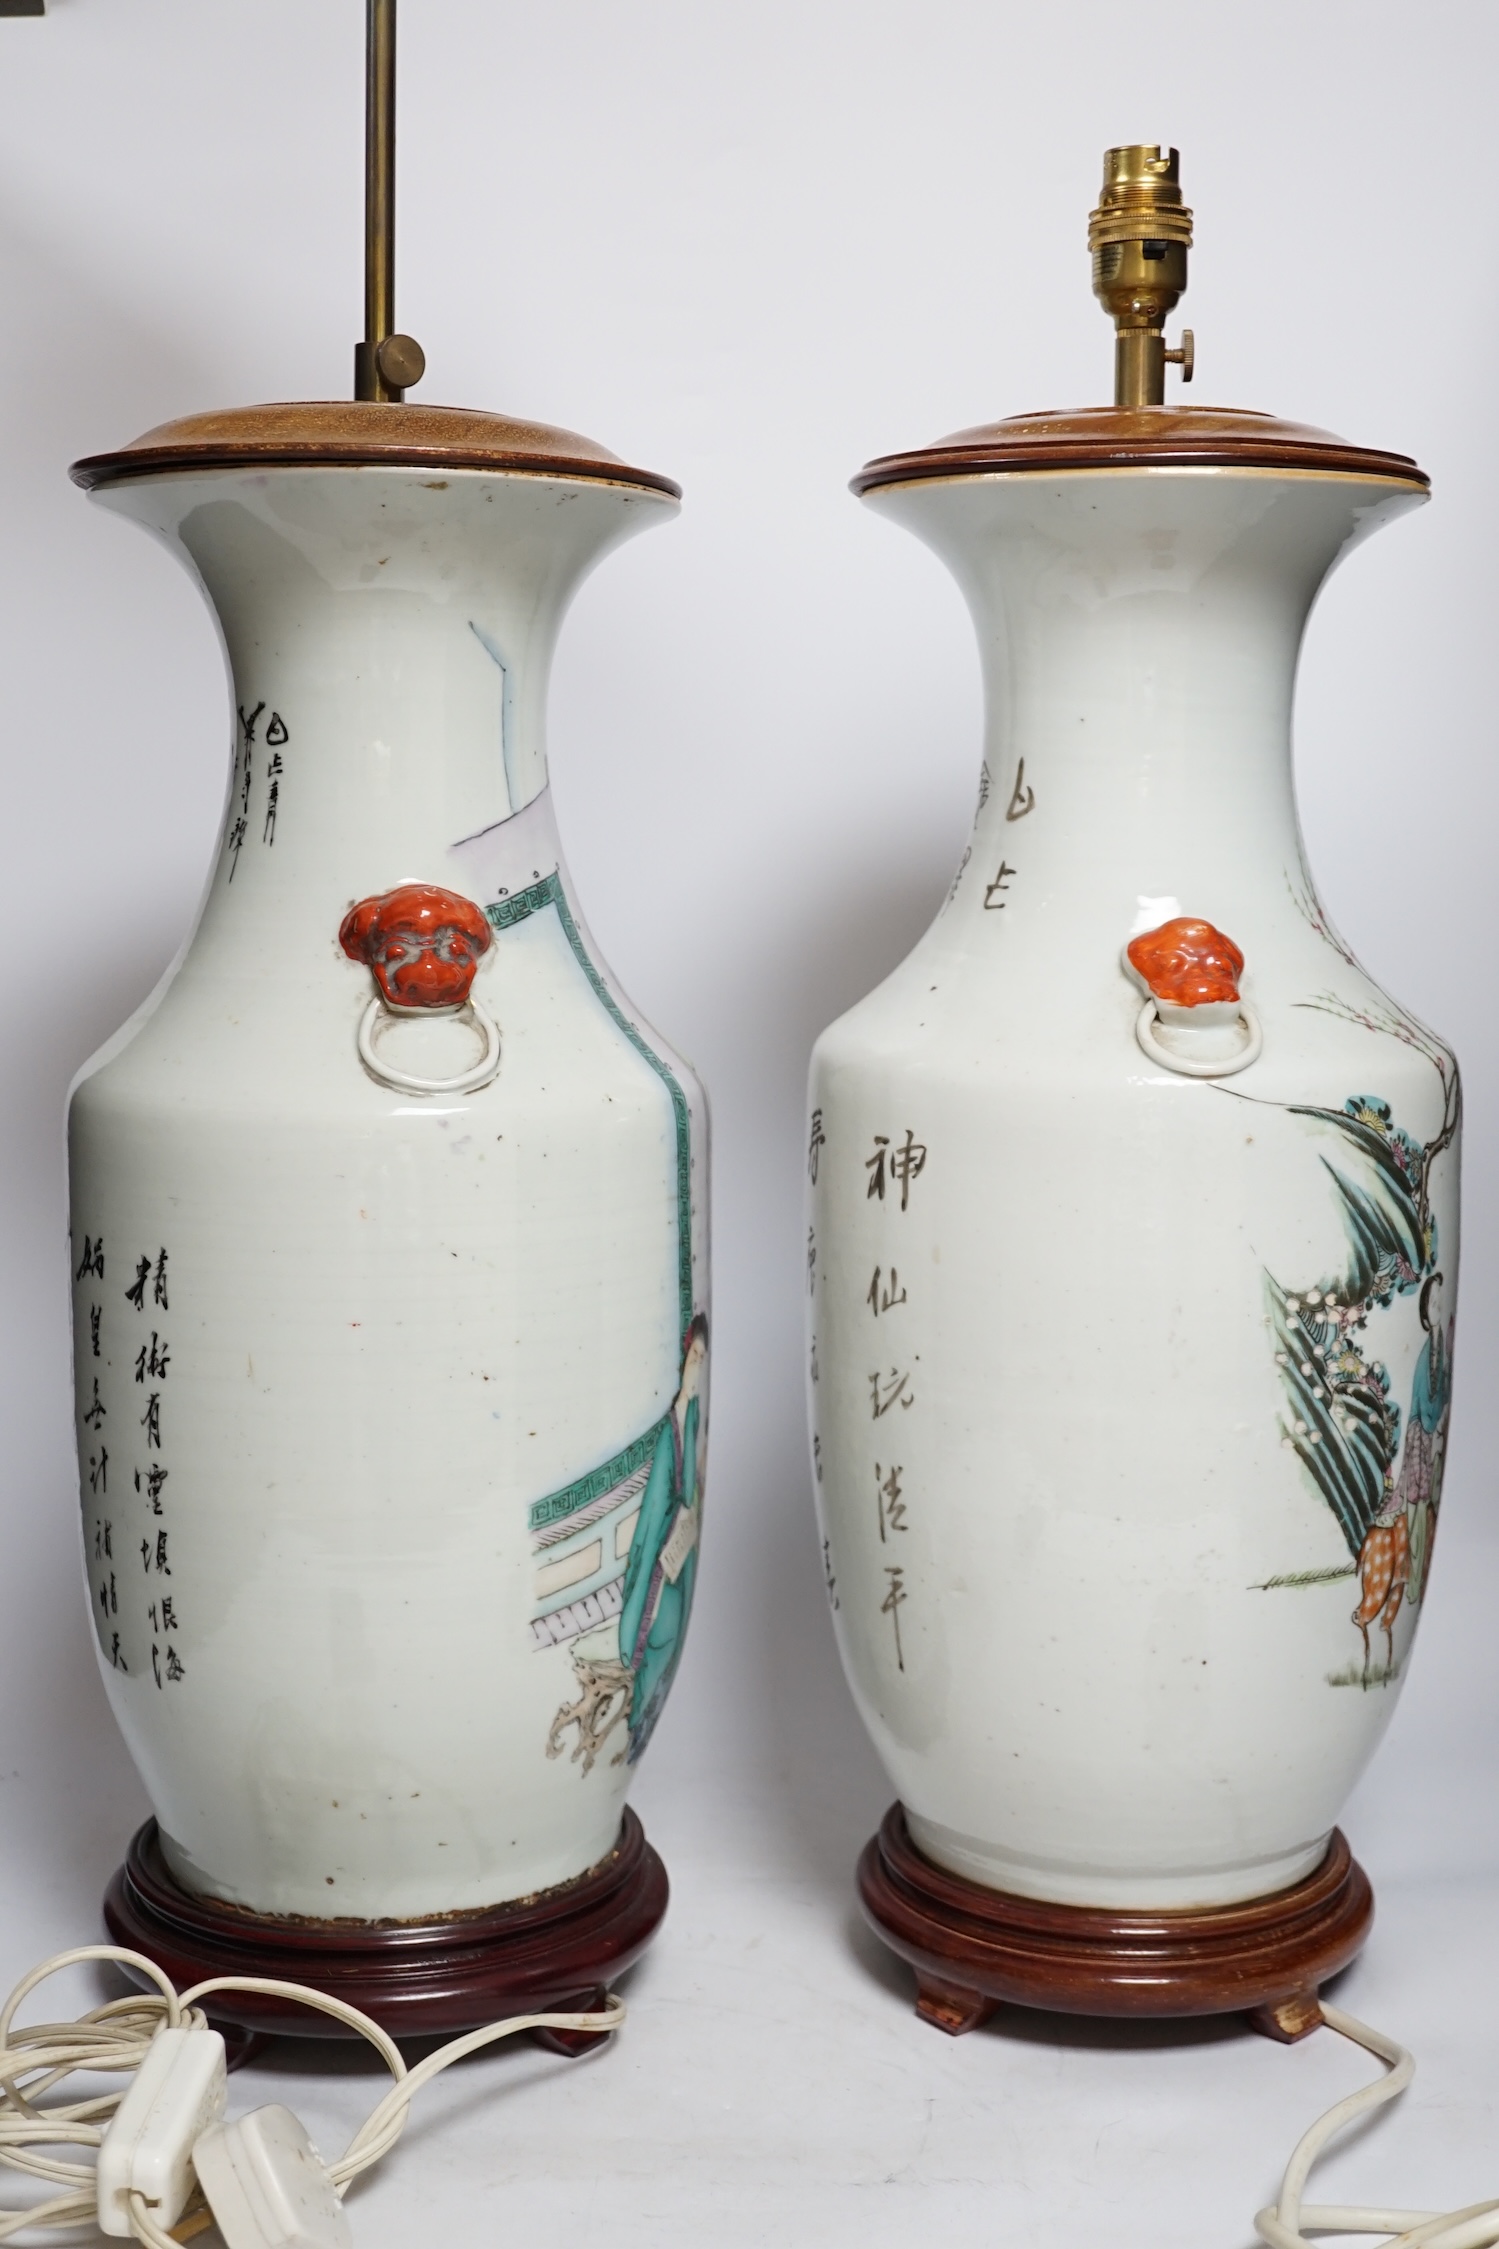 A near pair of Chinese vase lamps, early 20th century, 50cm high no including fittings